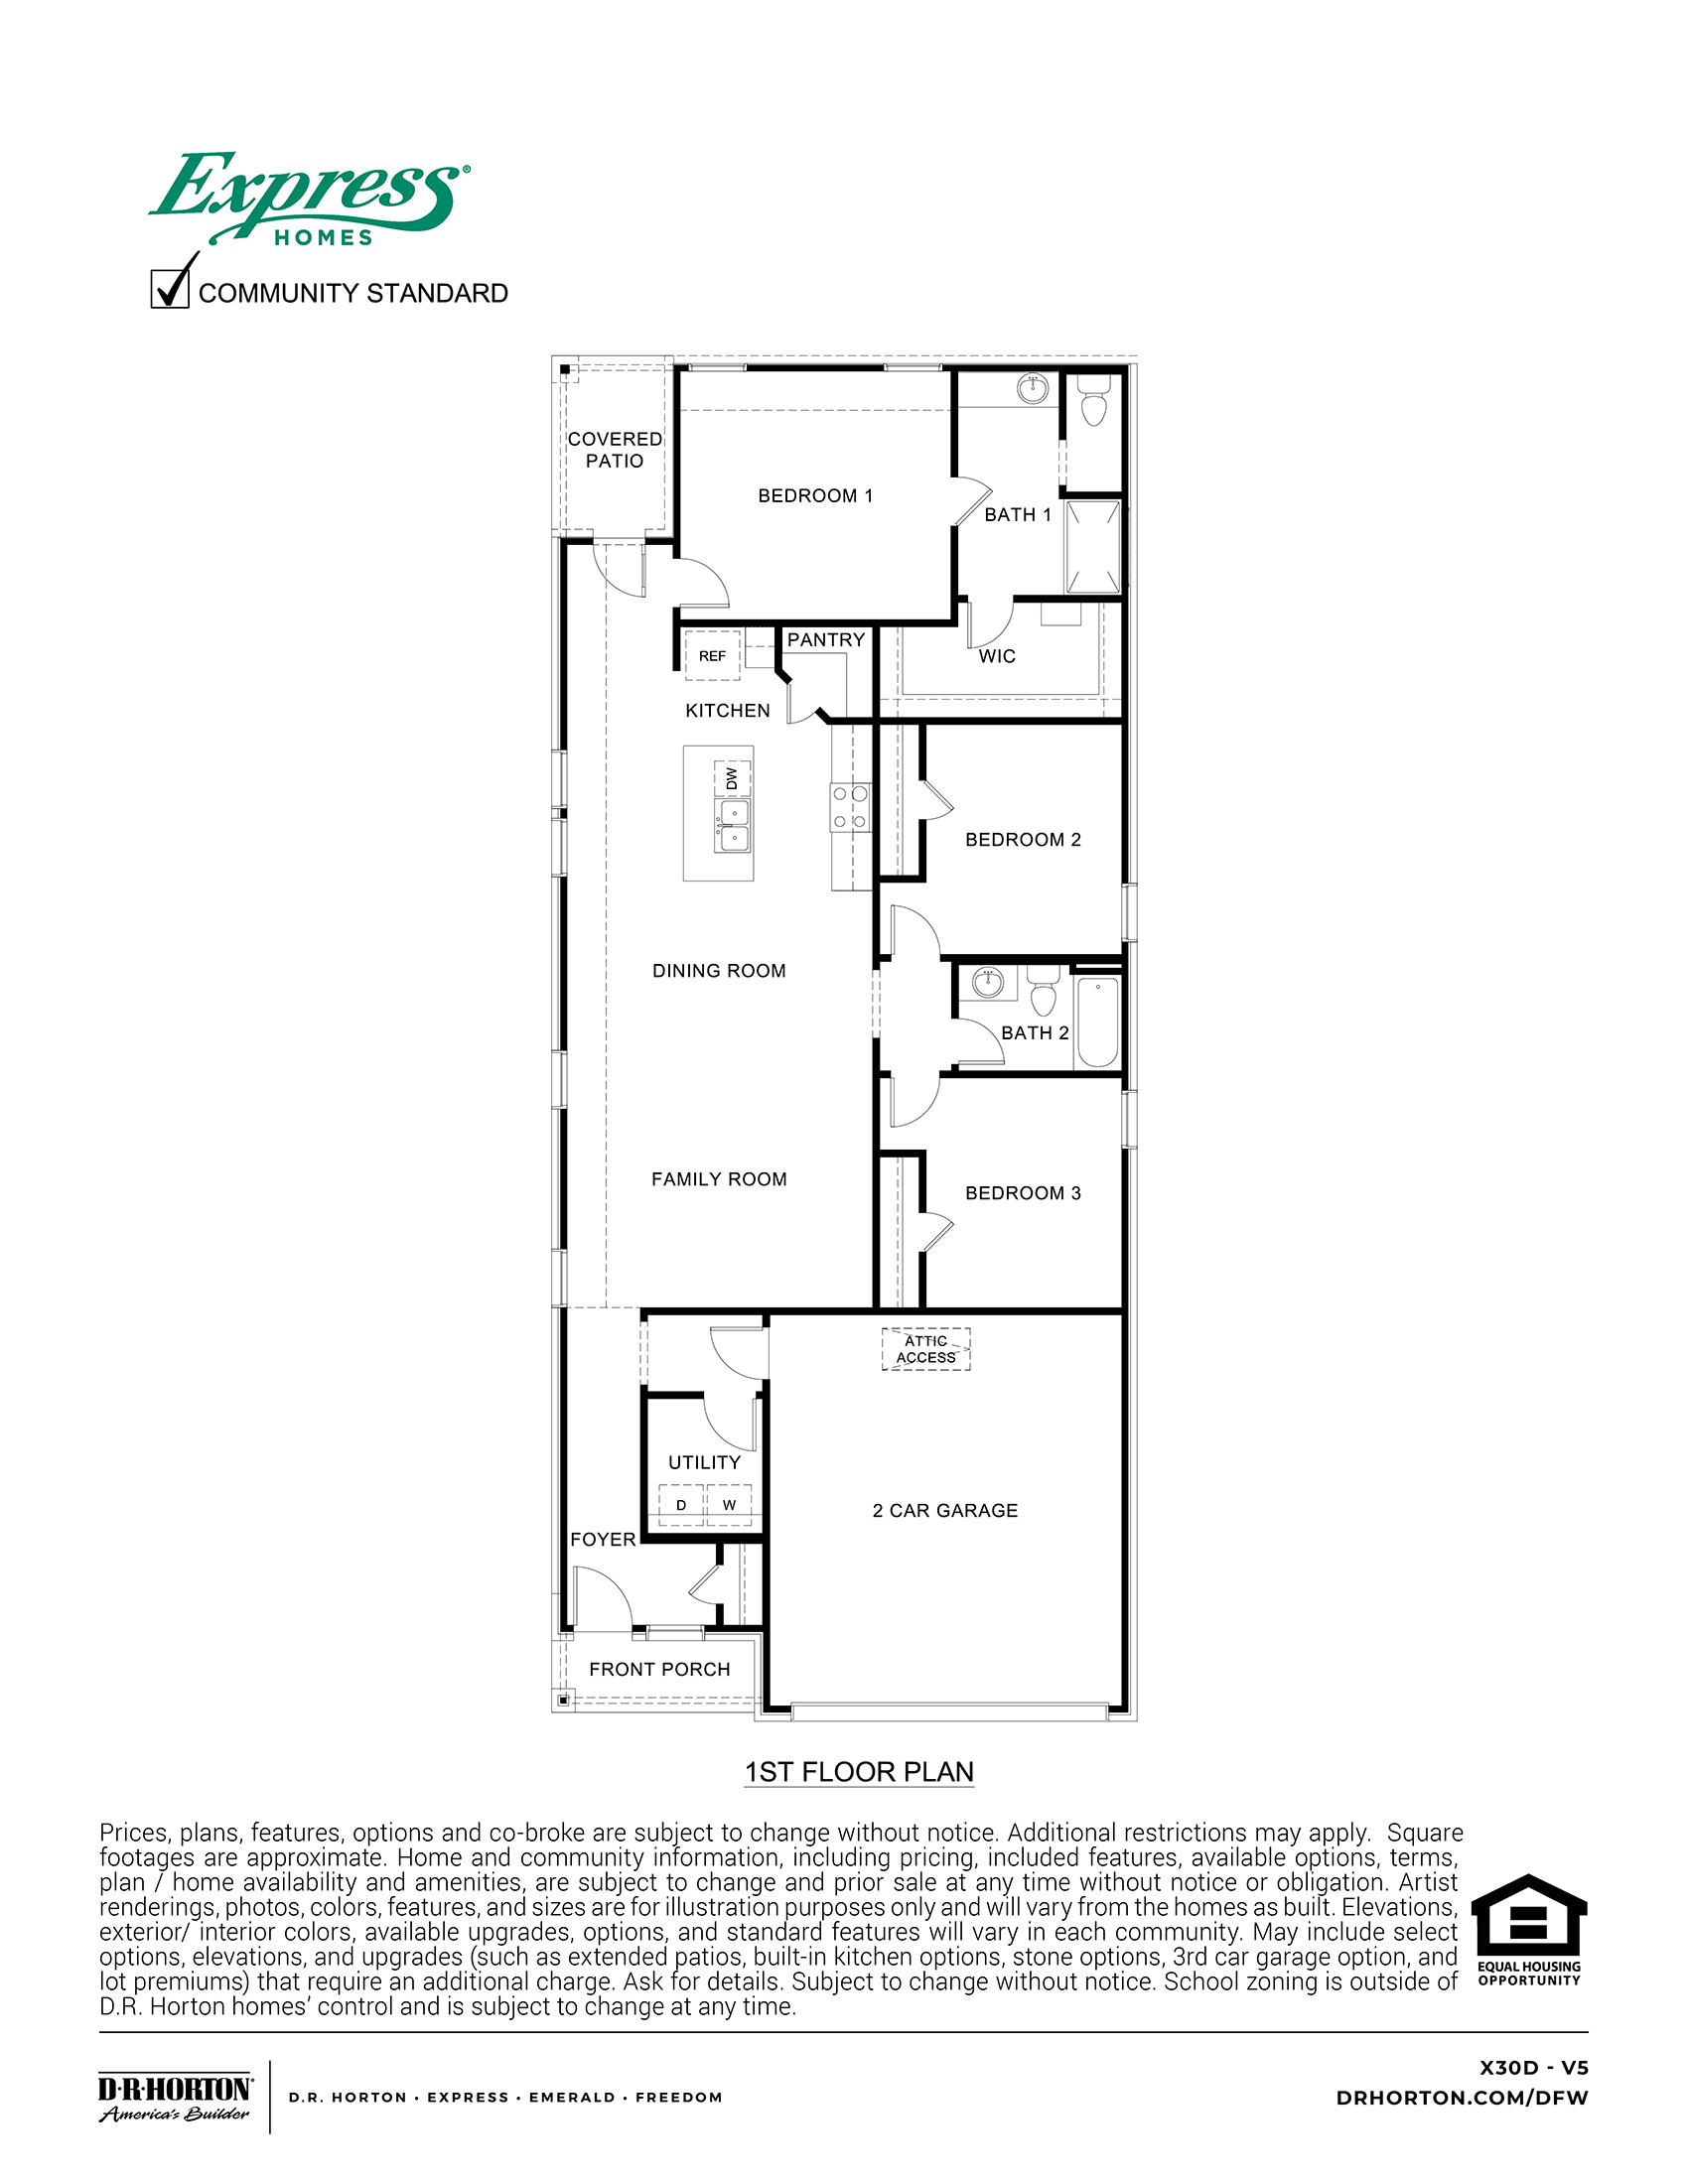 X30D Diana floorplan rendering - Governor's Lots in Forney TX